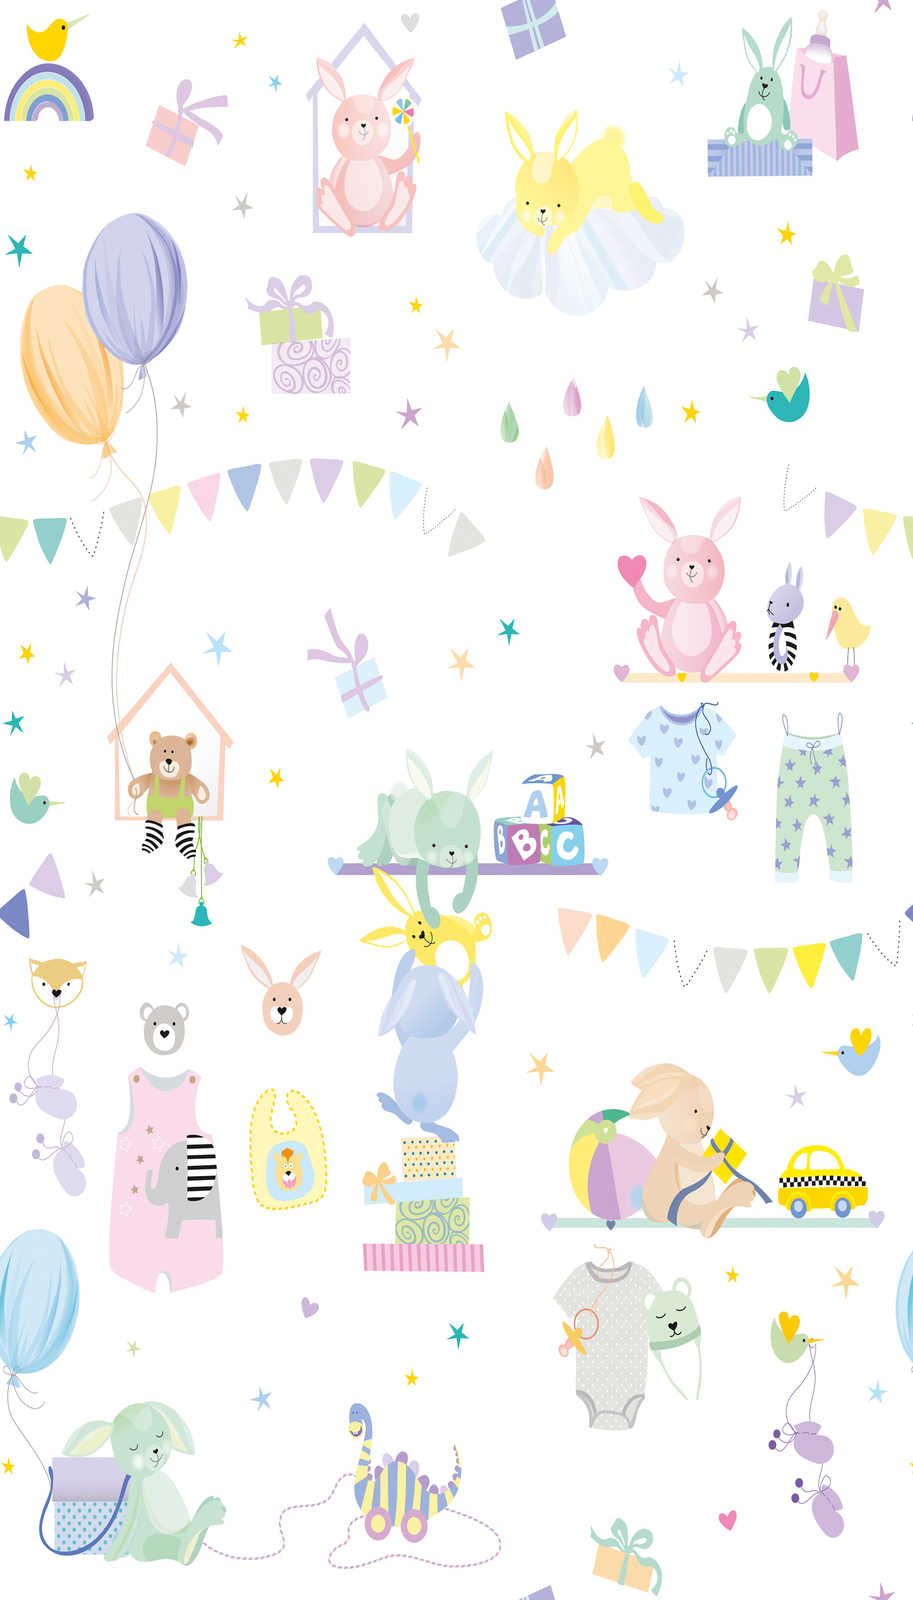             Children's motif wallpaper with animals in pastel colours - colourful, purple, pink
        